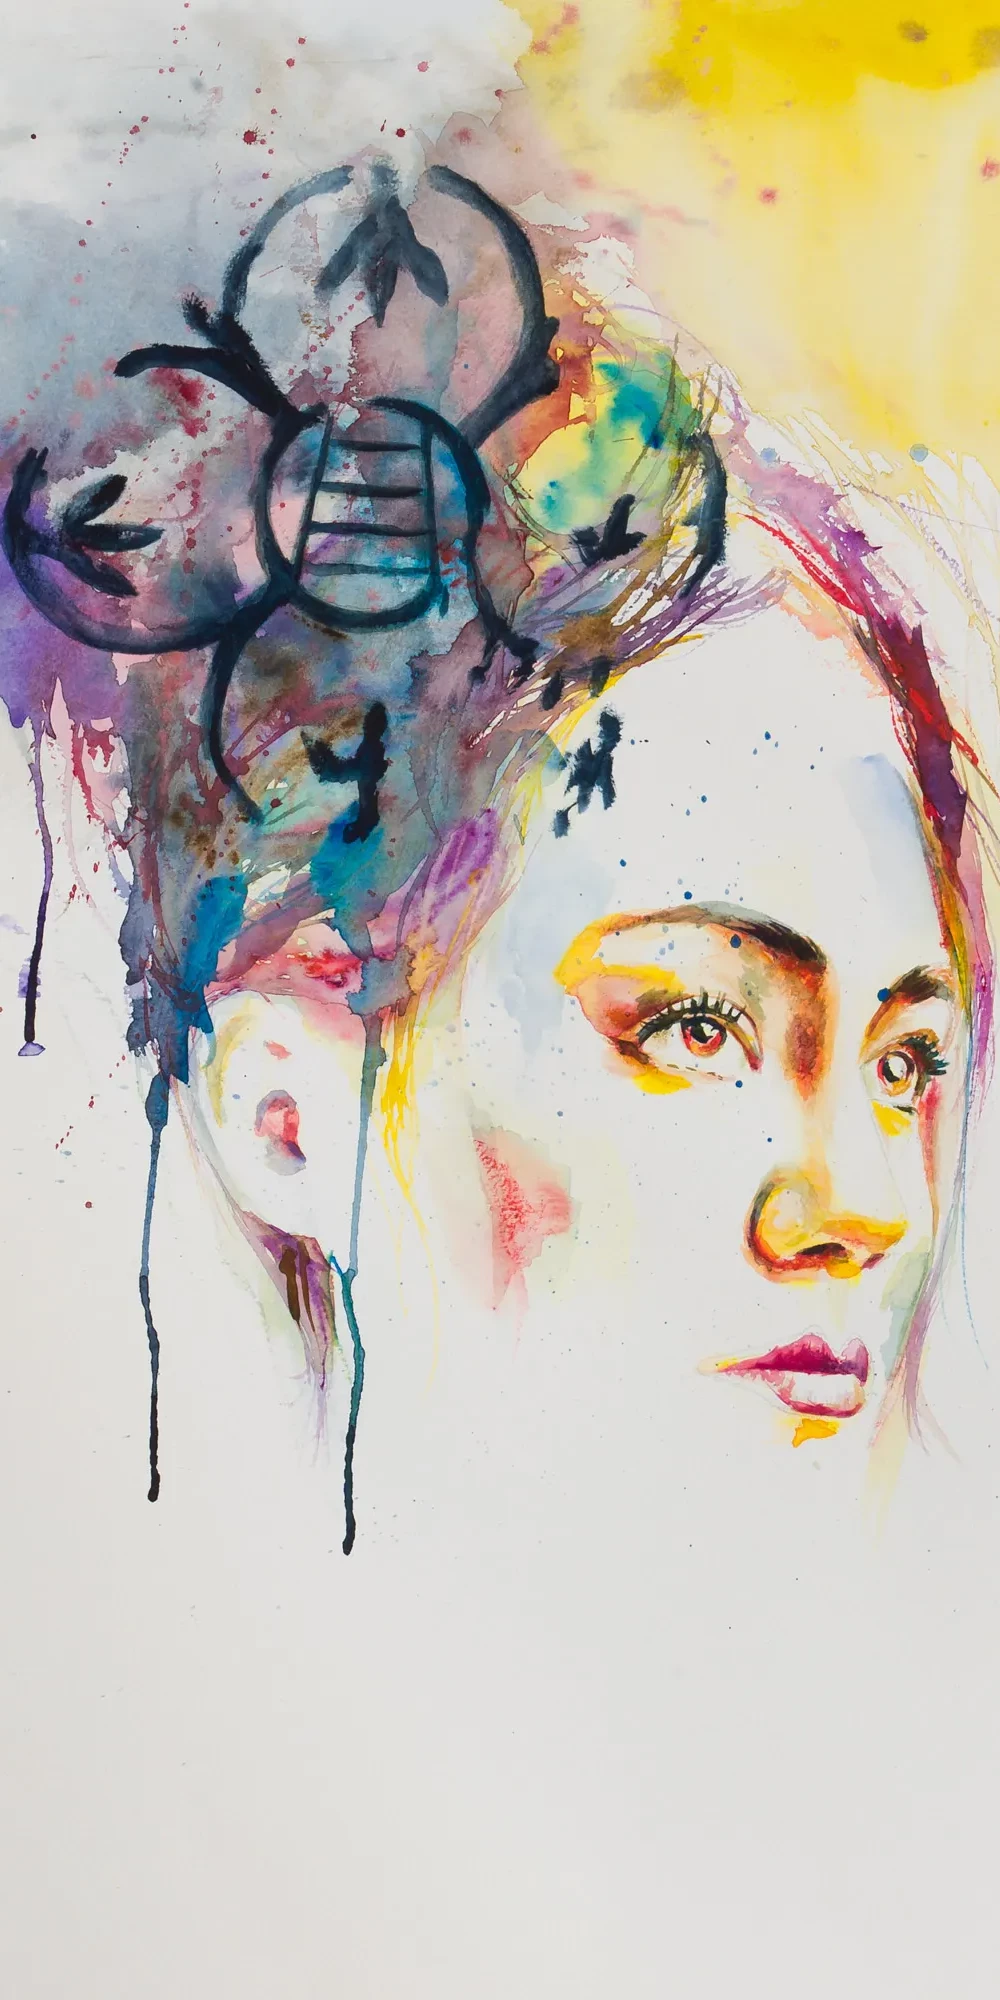 Verona on her mind - Watercolor on paper